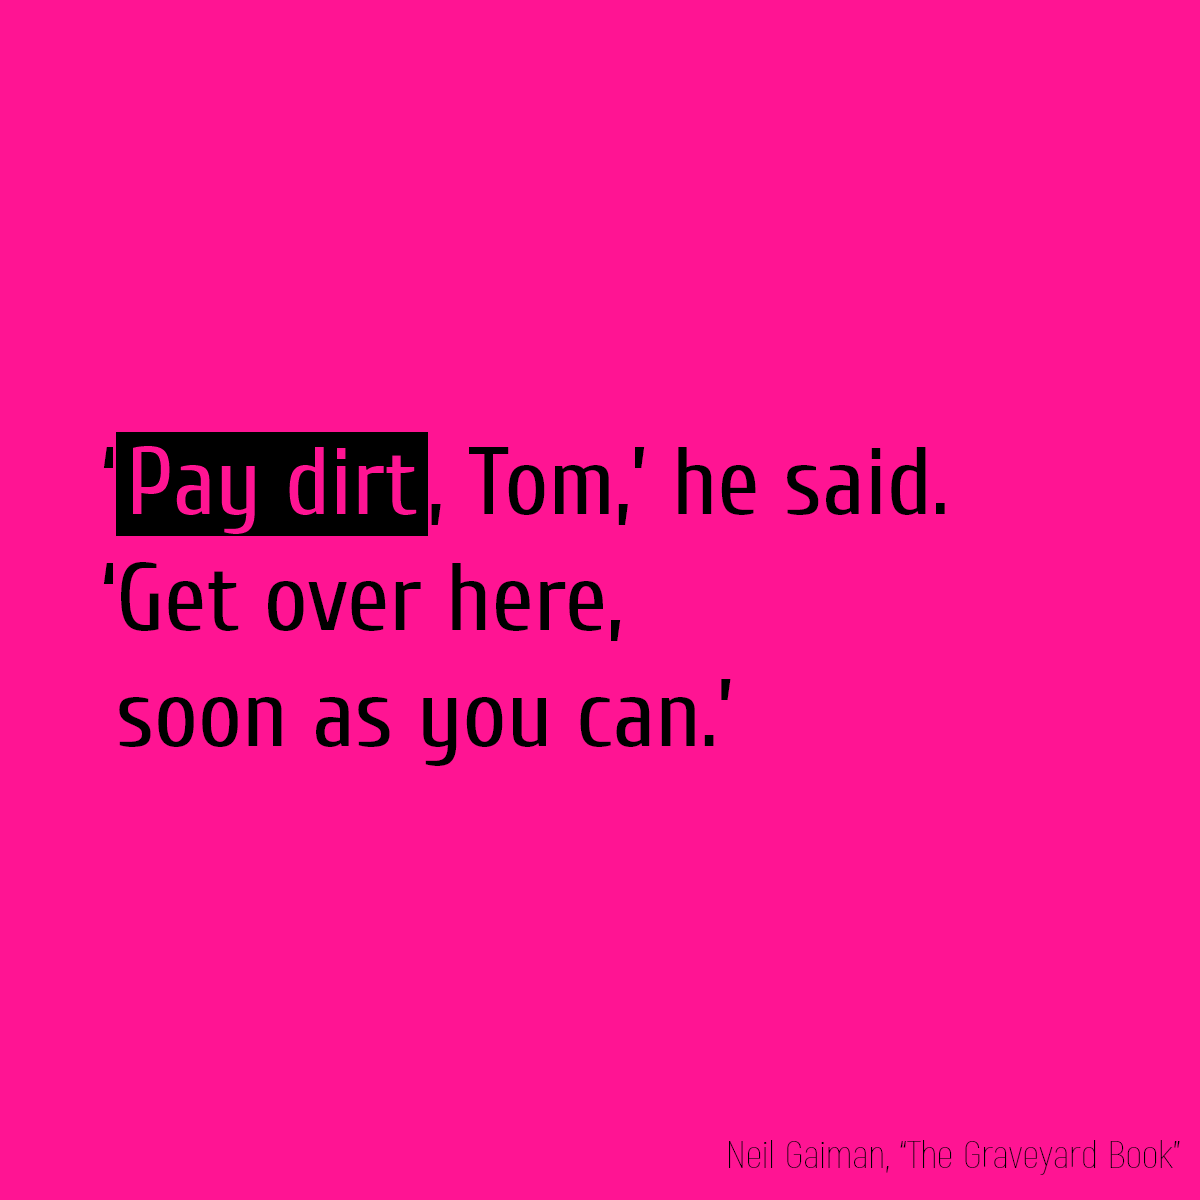 ‘**Pay dirt**, Tom,’ he said. ‘Get over here, soon as you can.’